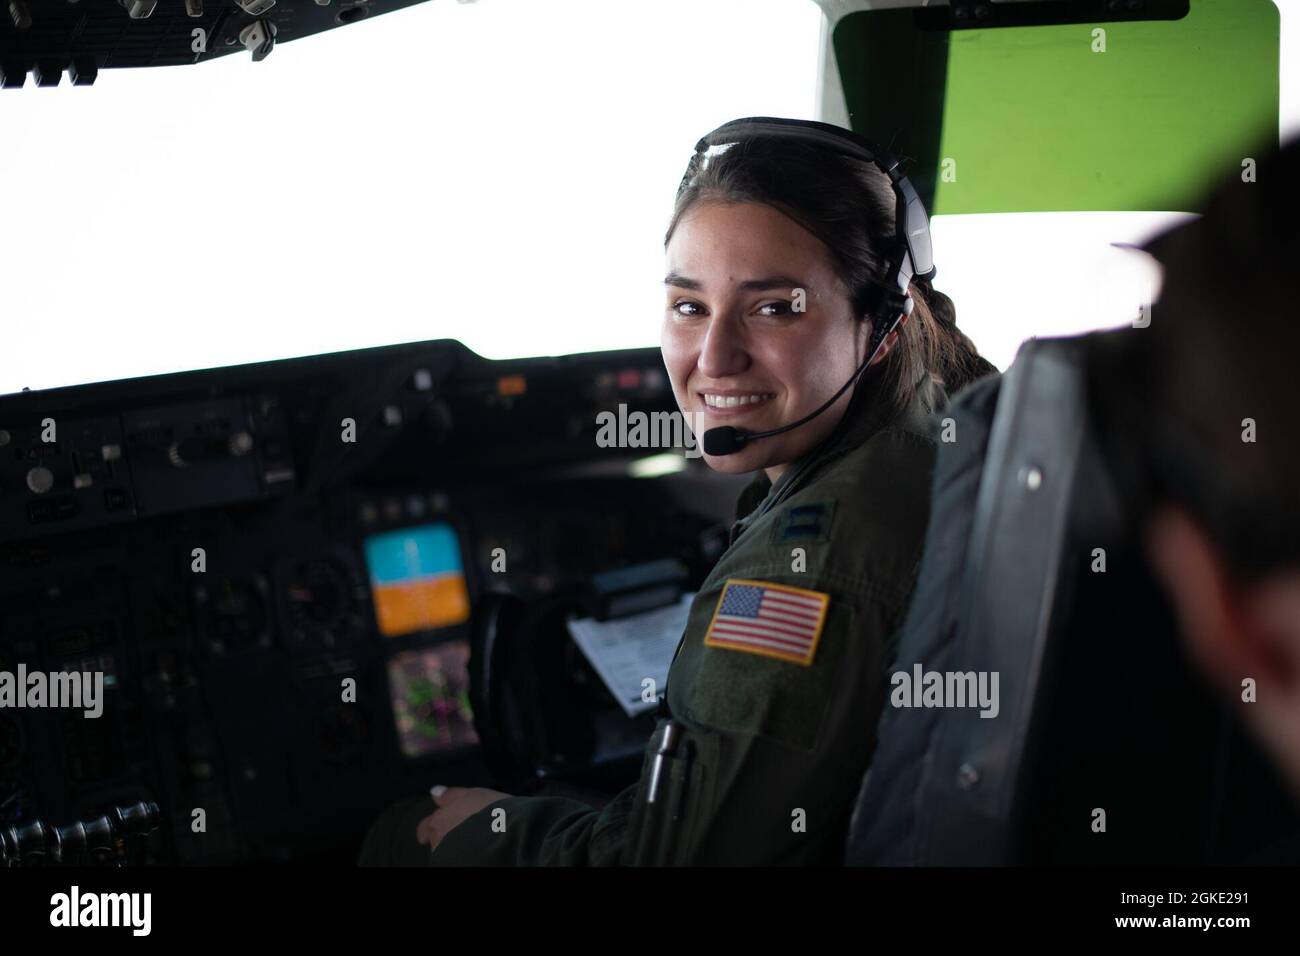 U.S. Air Force Capt. Karen Miller, 6th Air Refueling Squadron KC-10 Extender pilot, smiles at the camera during Women’s History Month heritage flight March 25, 2021, at Travis Air Force Base, California. In honor of Women's History Month, an all-female flight crew from the 6th ARS flew on an aerial refueling training mission eastbound to Wyoming and Naval Air Station Fallon. Stock Photo